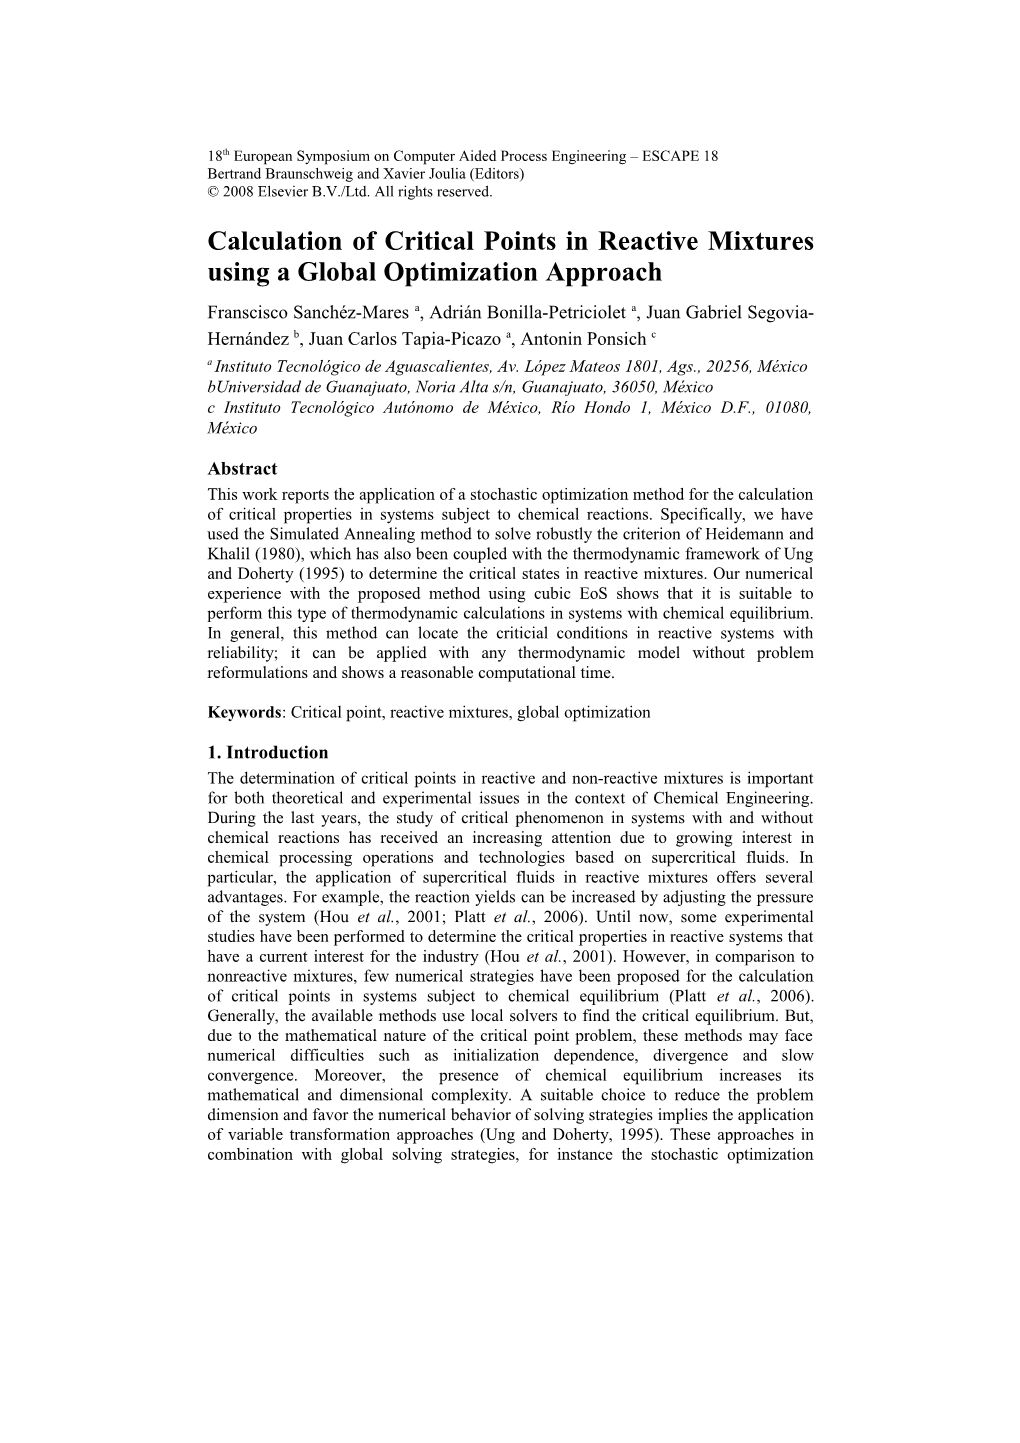 Calculation of Critical Points in Reactive Mixtures Using a Global Optimization Approach